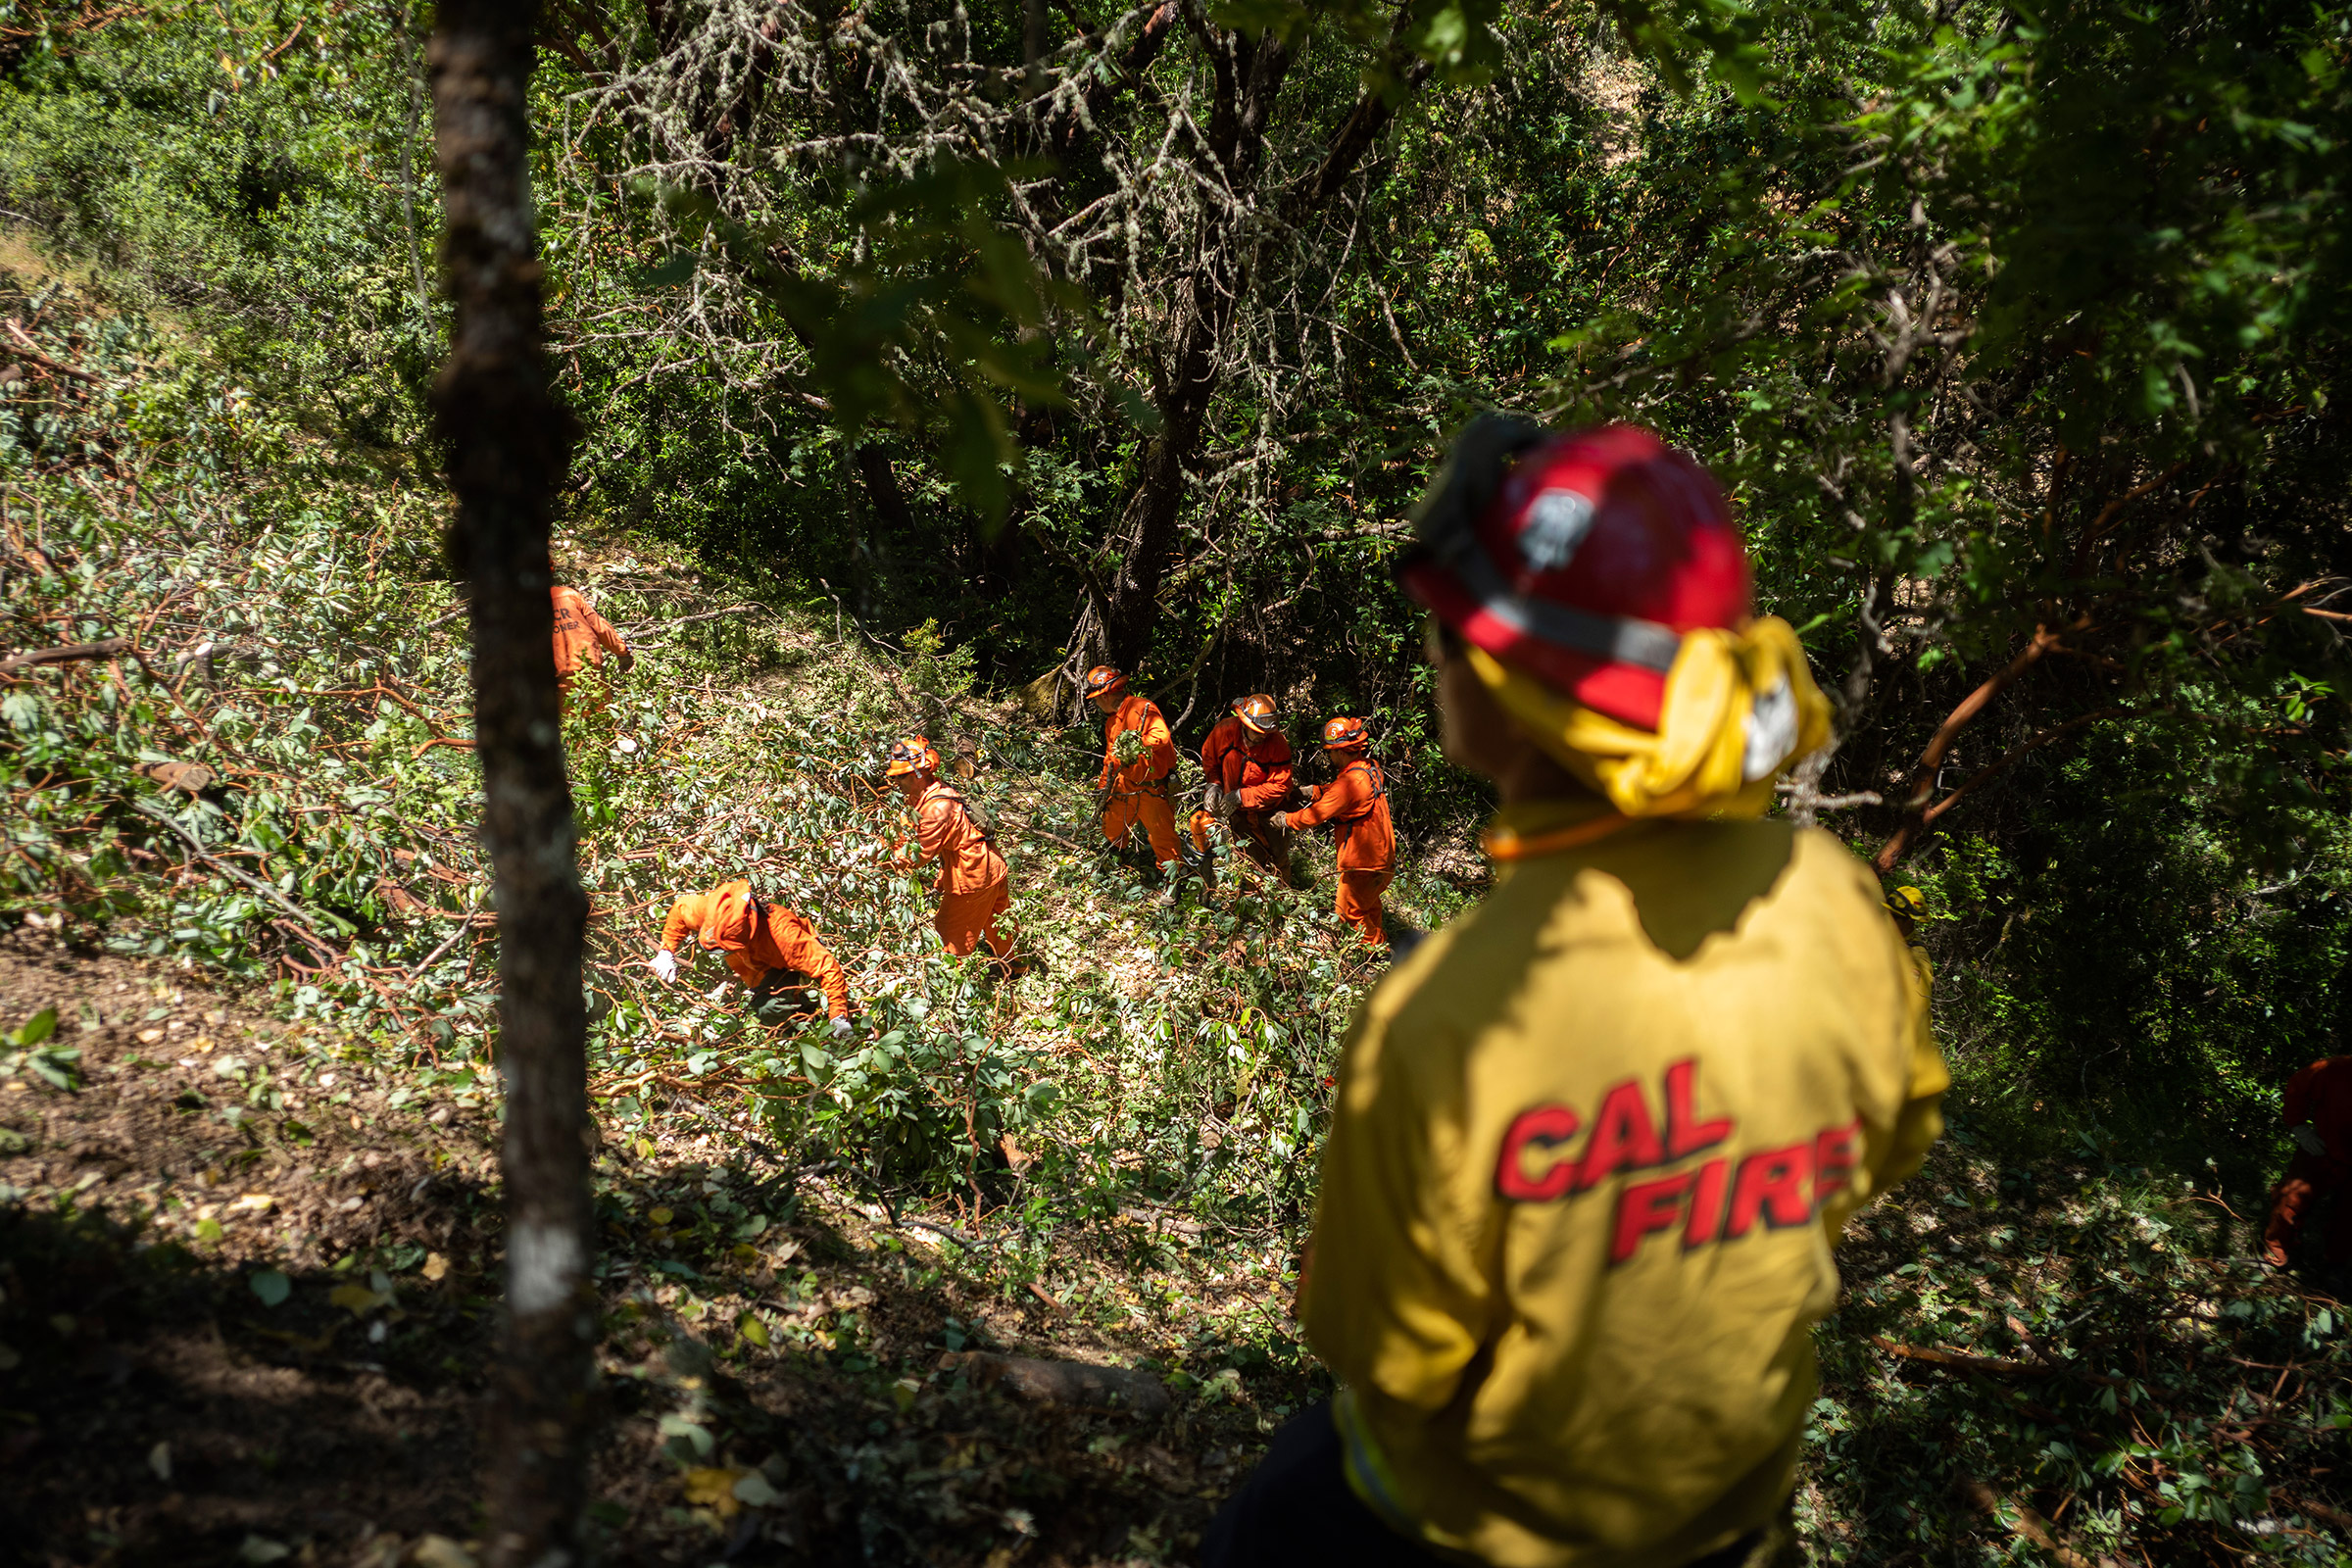 Fire crews cut brush in the hills around Ukiah, Calif., on Wednesday, June 19, 2019. (Brian L. Frank for TIME)